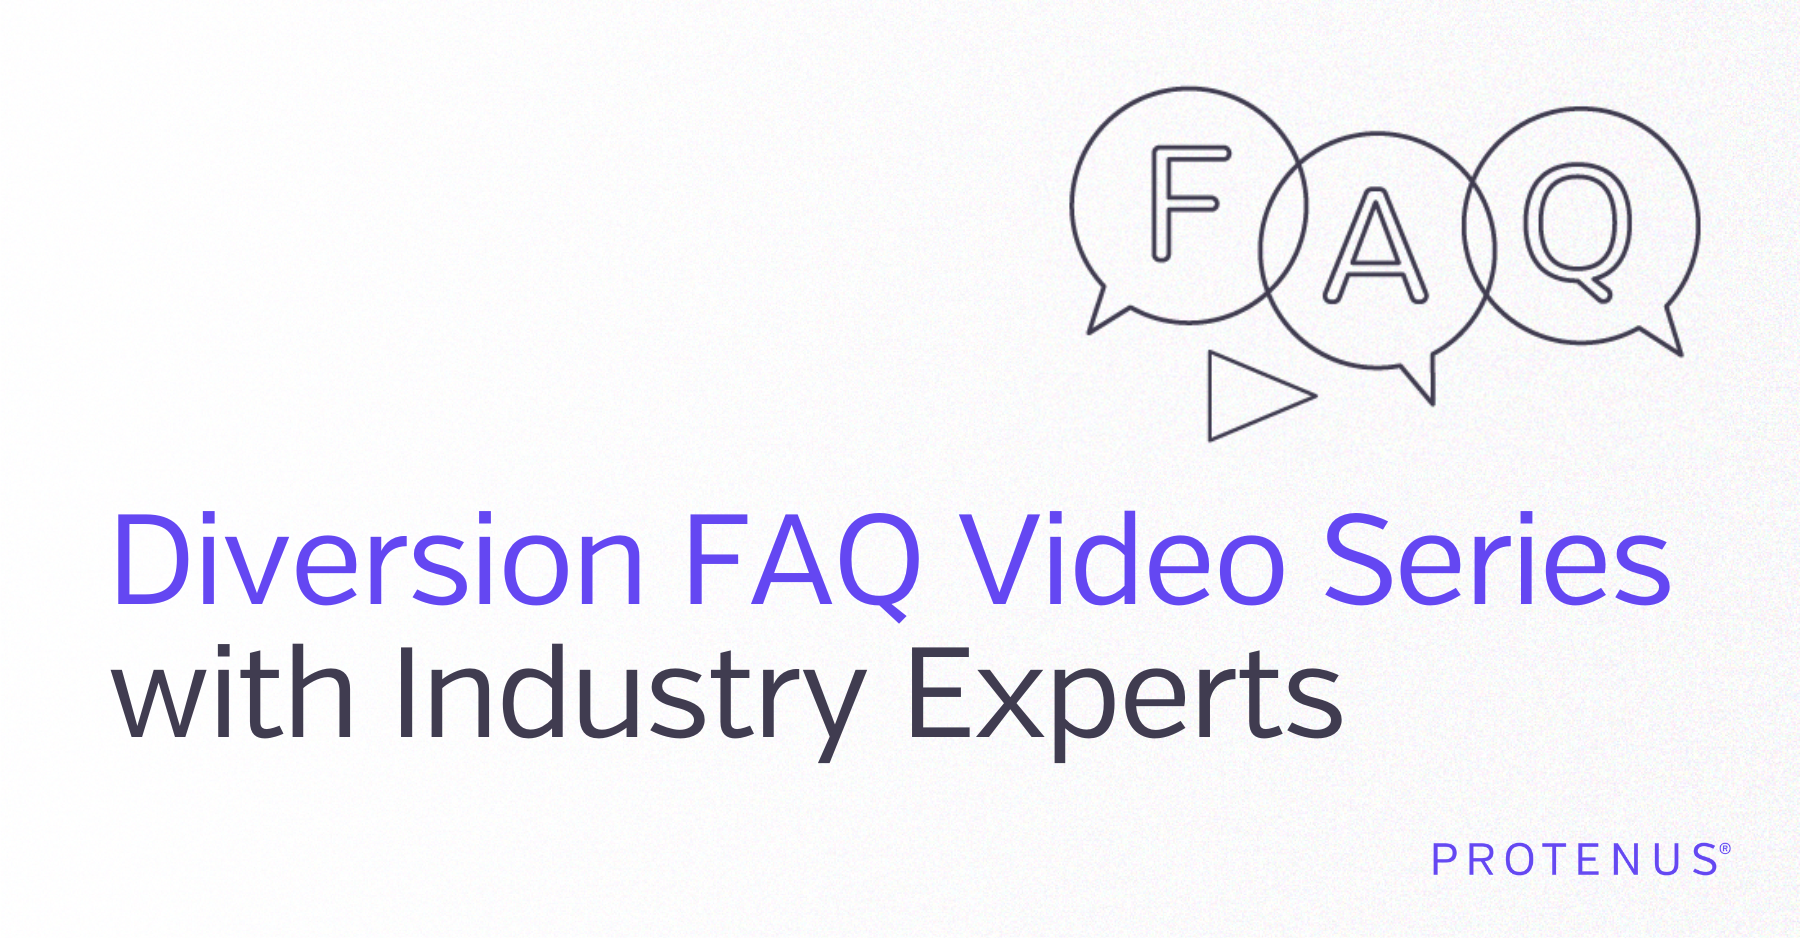 Drug Diversion FAQ Video Series with Expert Insight, Actionable Advice